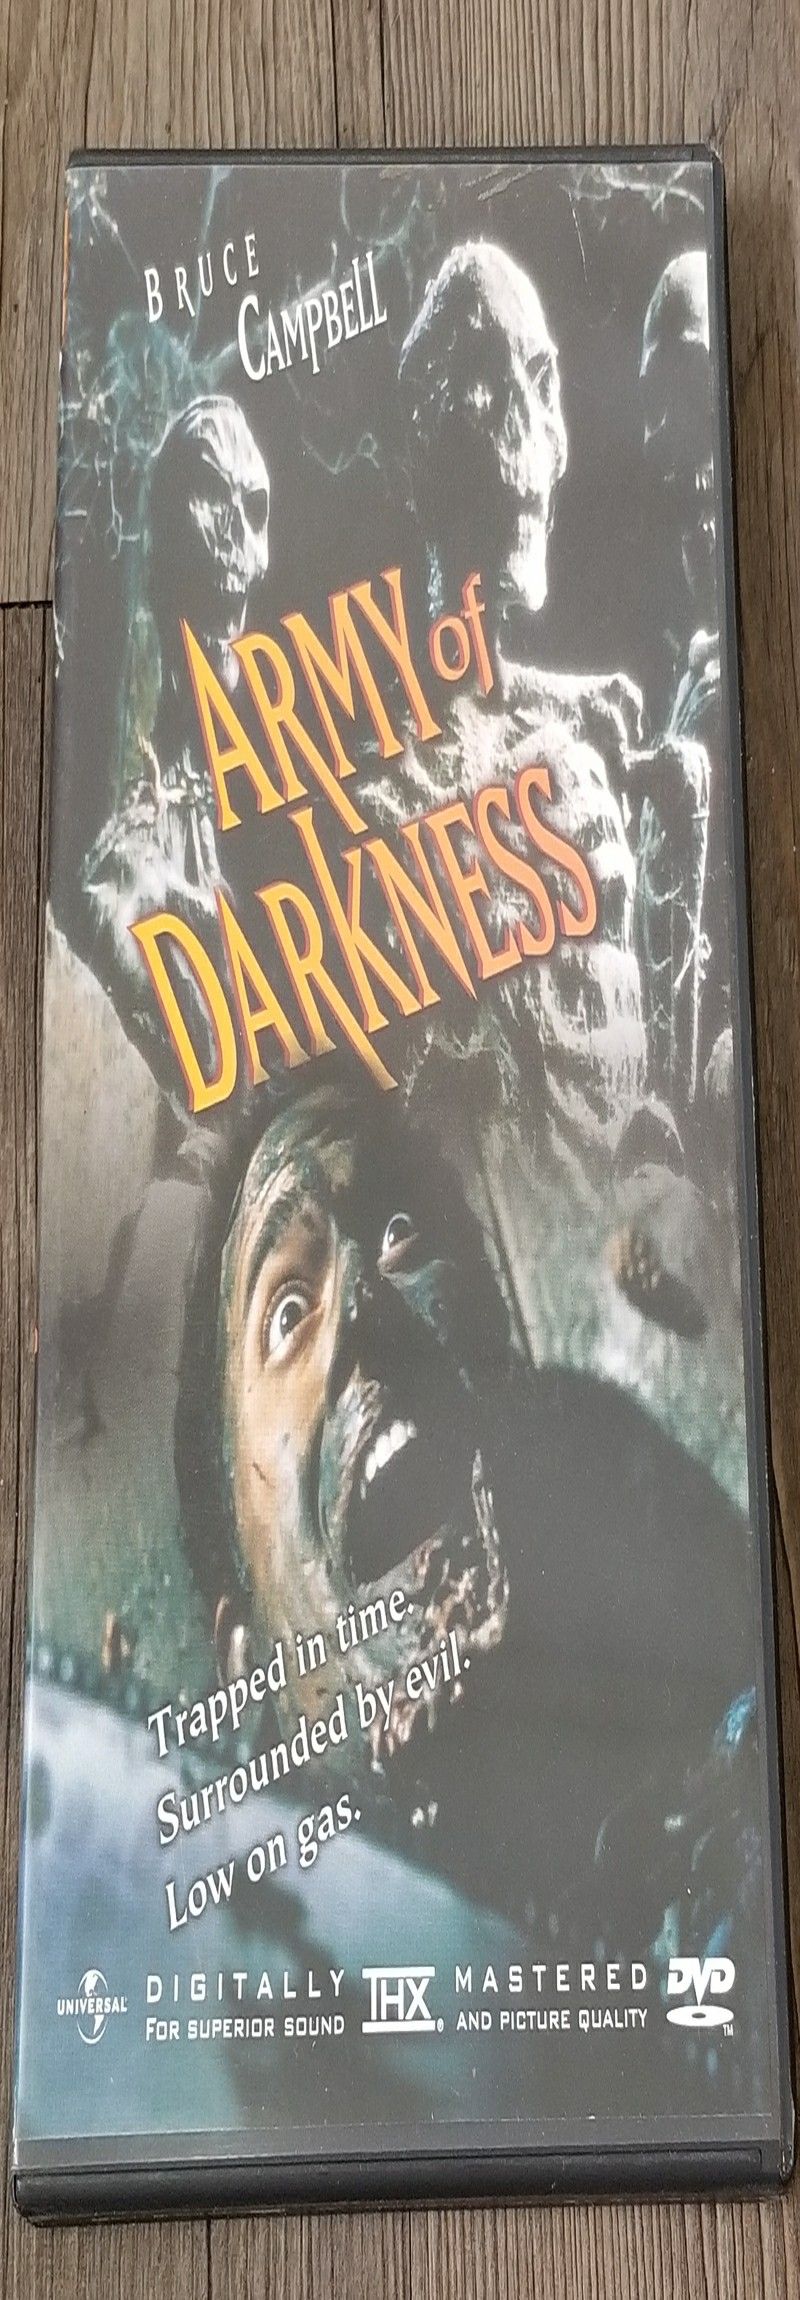 Army of Darkness (DVD, Special Edition, Widescreen/Fullscreen, 1999)